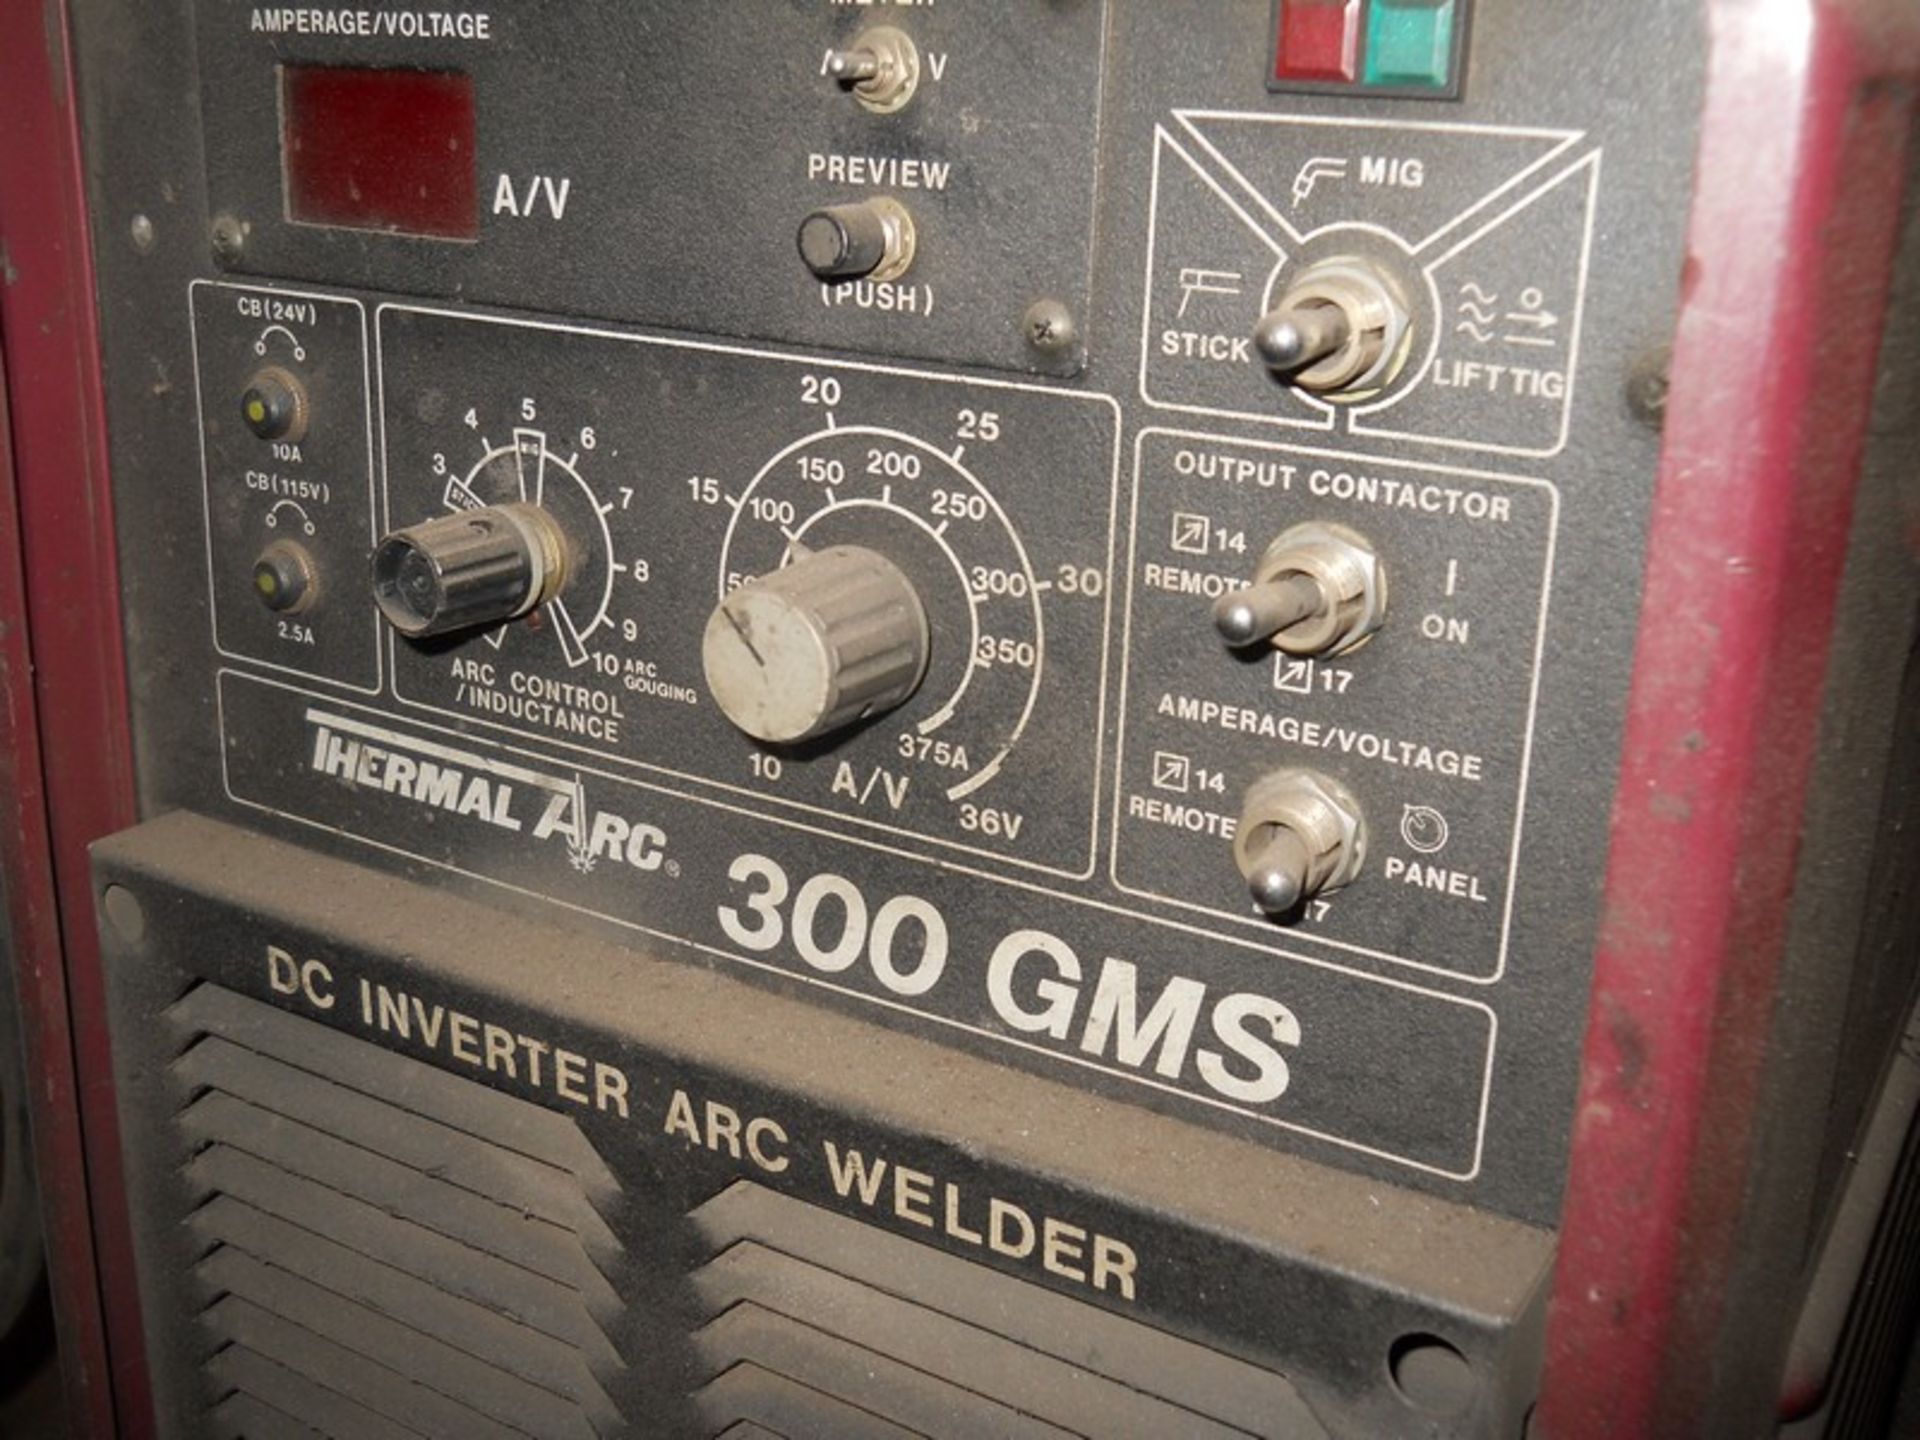 Thermal Arc Model 300 GMS DC Inverter Arc Welder, S/N: E416287A188204A; with Miller S-22A Wire - Image 4 of 7